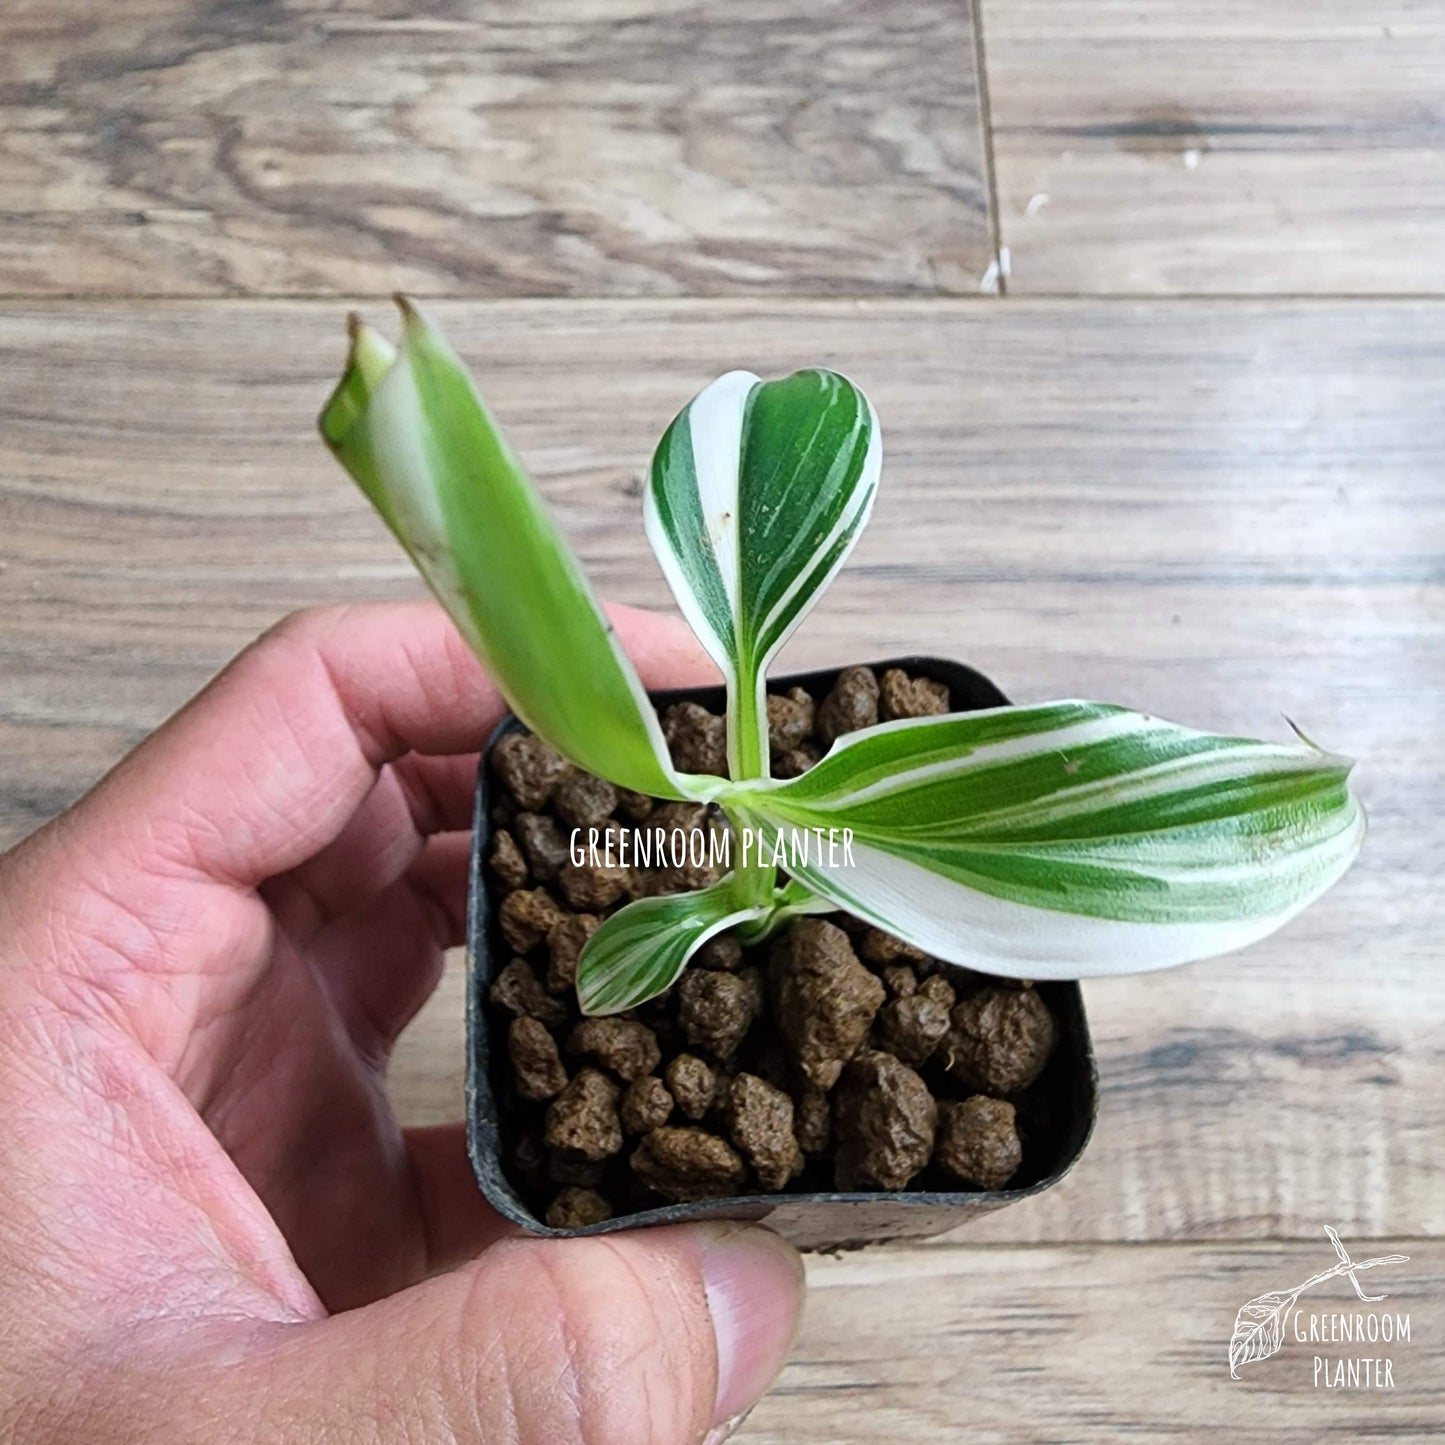 Rare plant that is must have for variegated plant lovers. Beautiful variegated banana tree with white, mint and green strips on the leaves. Photo by Greenroom Planter